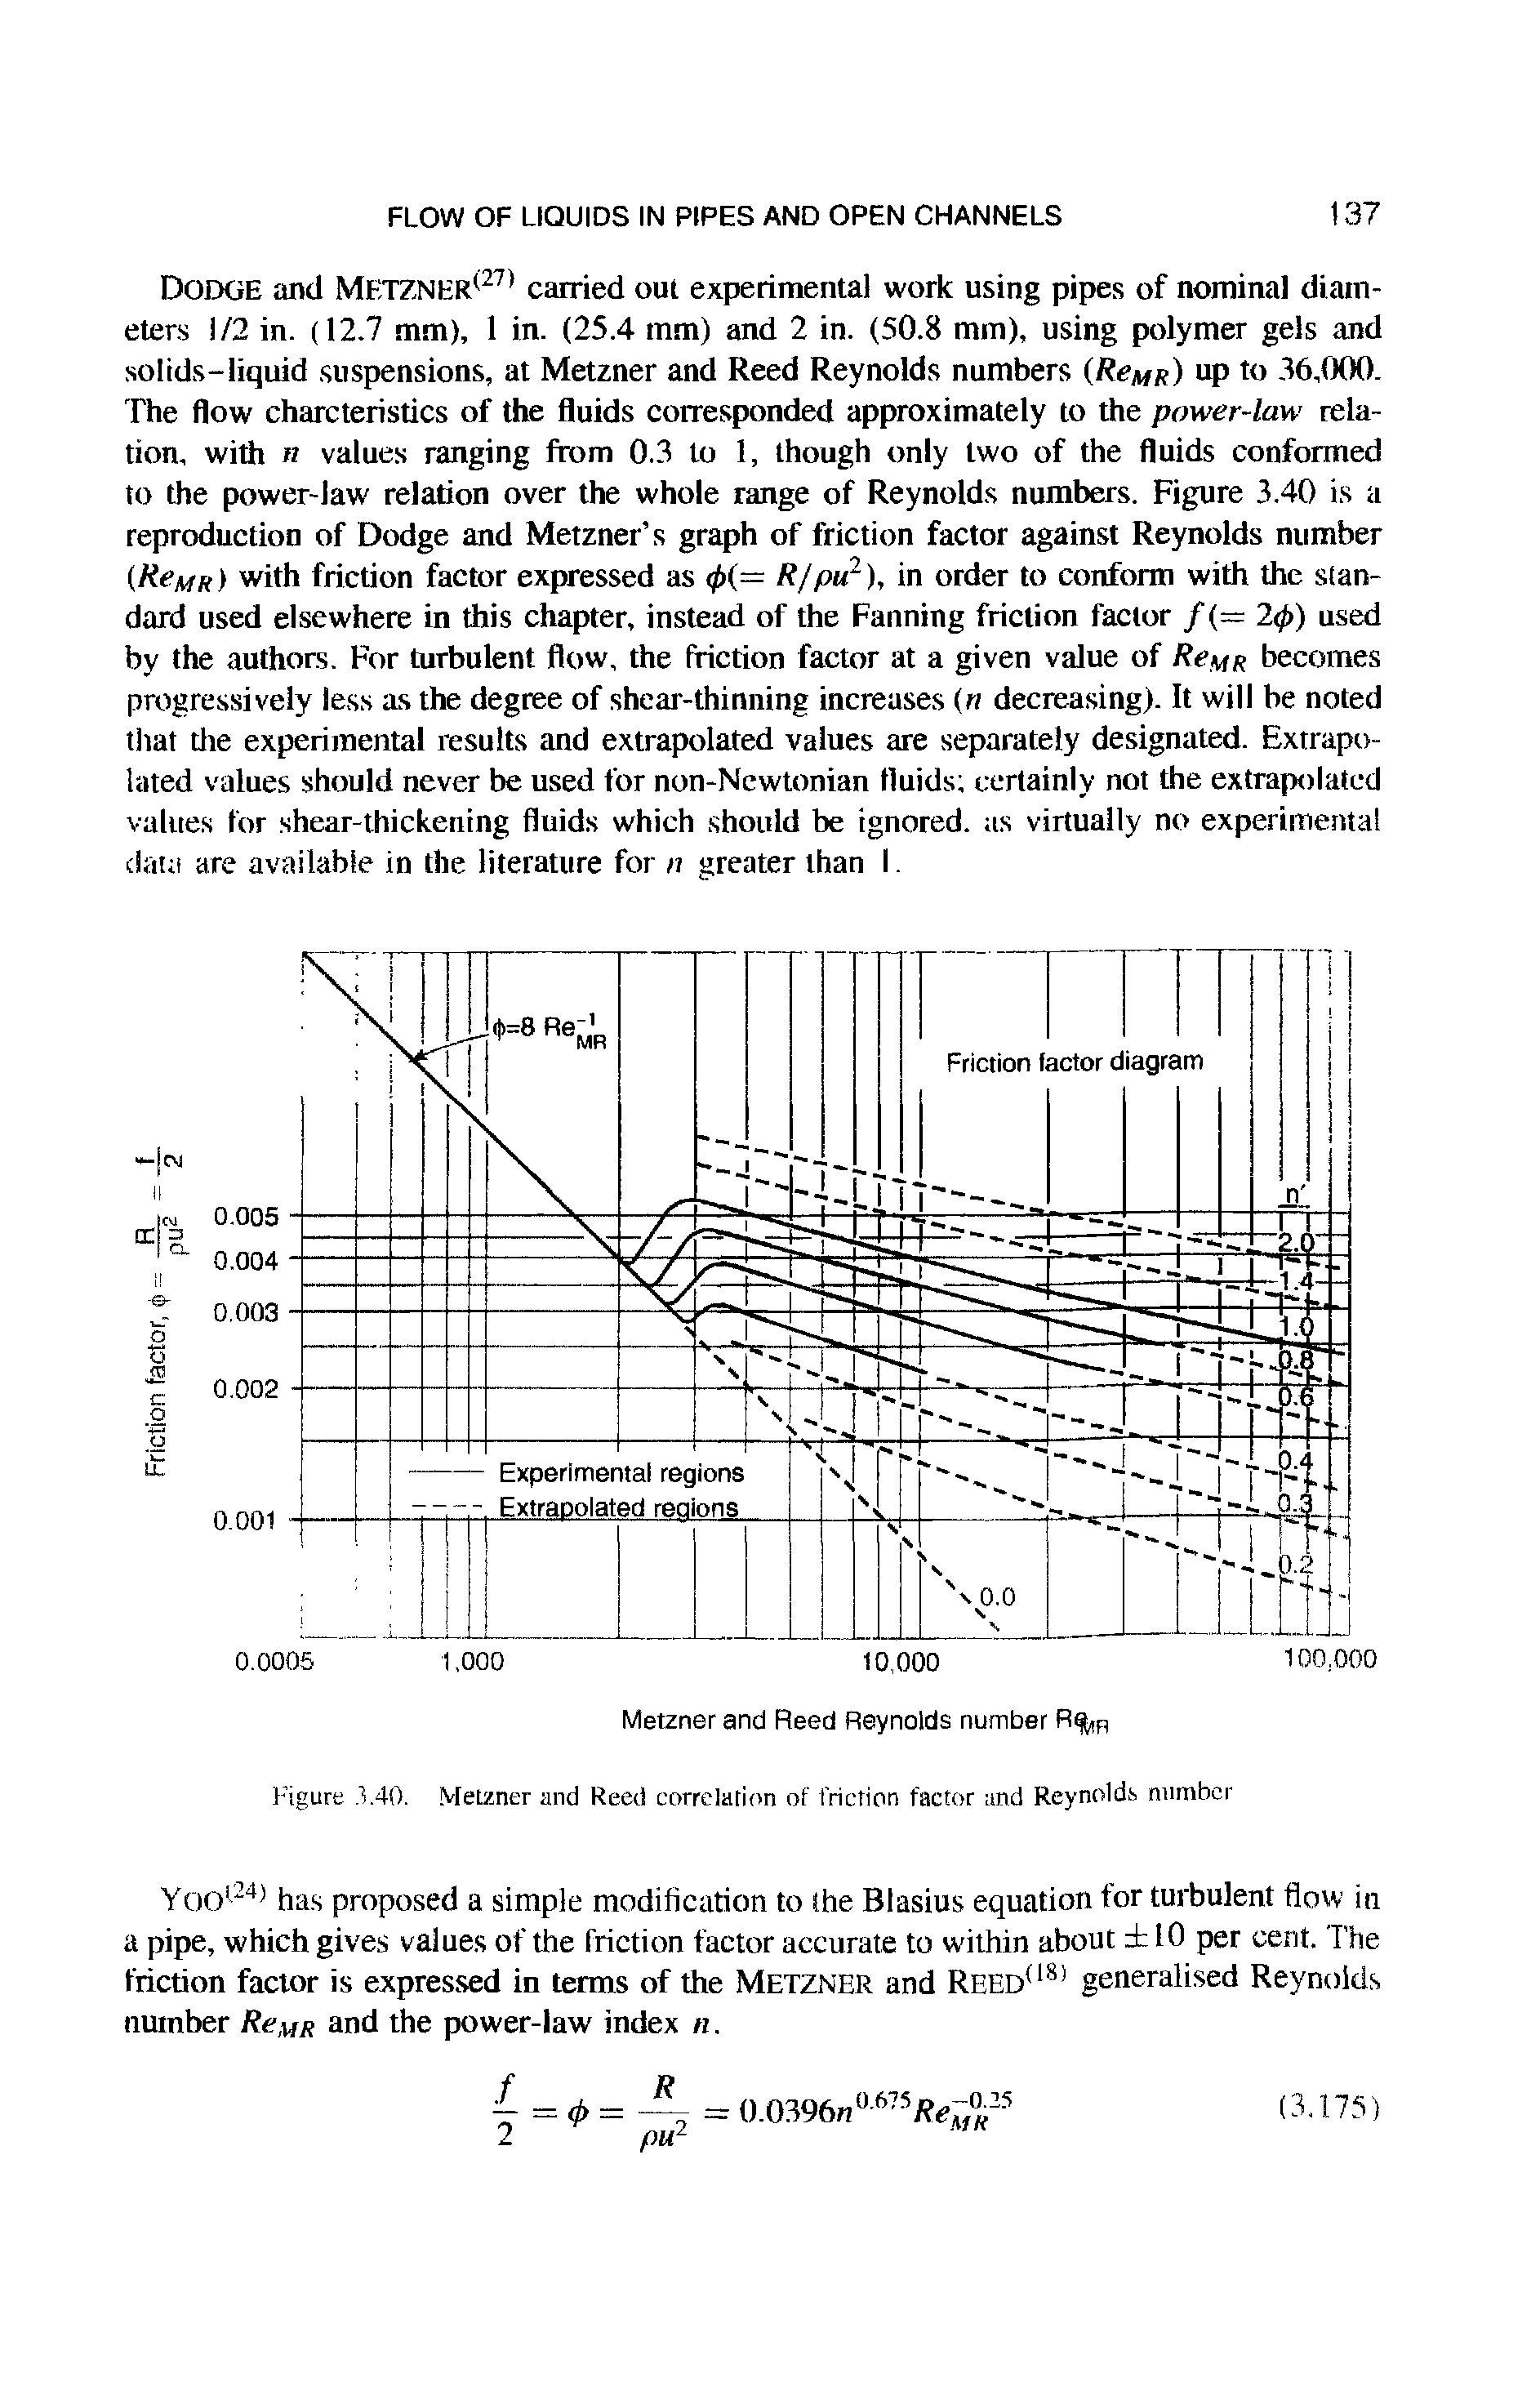 Figure 3.40. Metzner and Reed correlation of friction factor and Reynolds number...